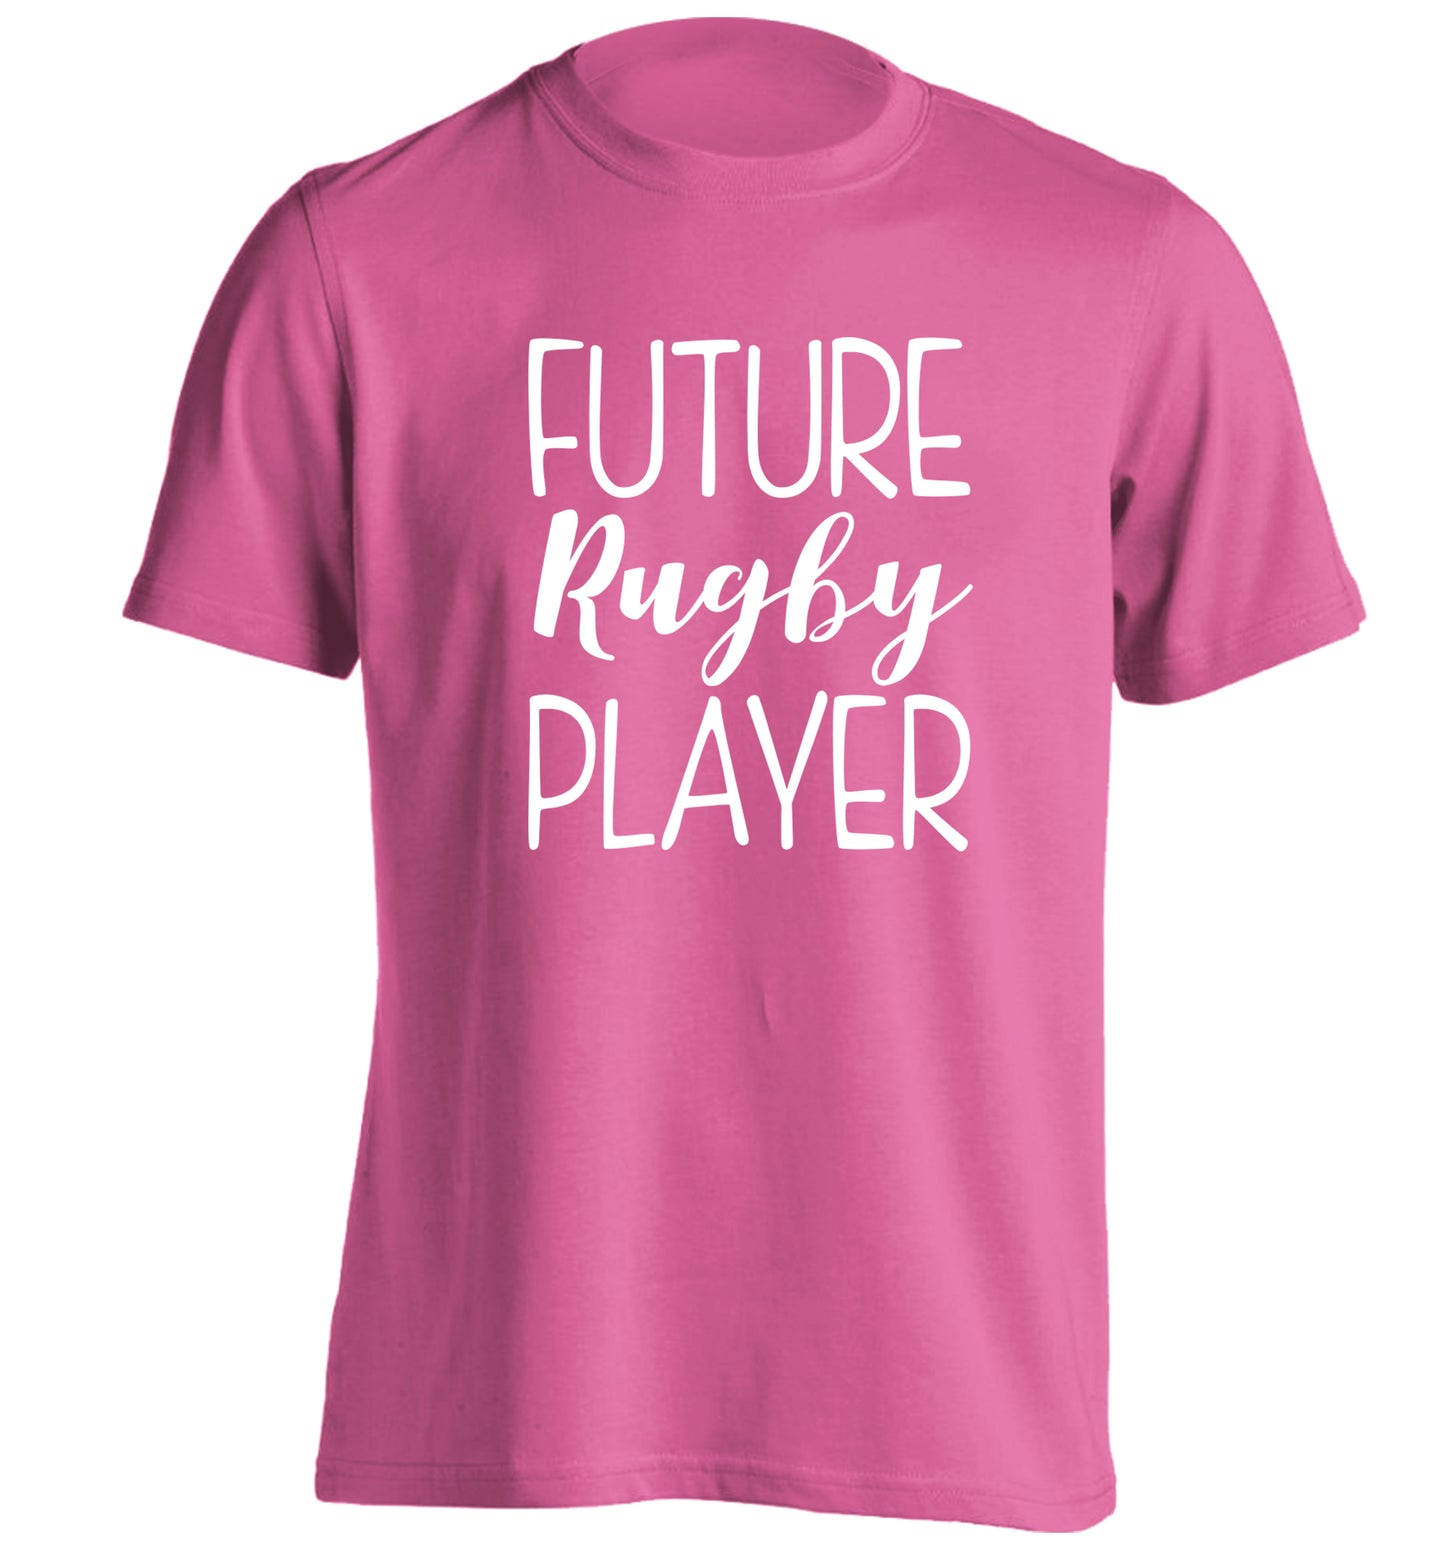 Future rugby player adults unisex pink Tshirt 2XL